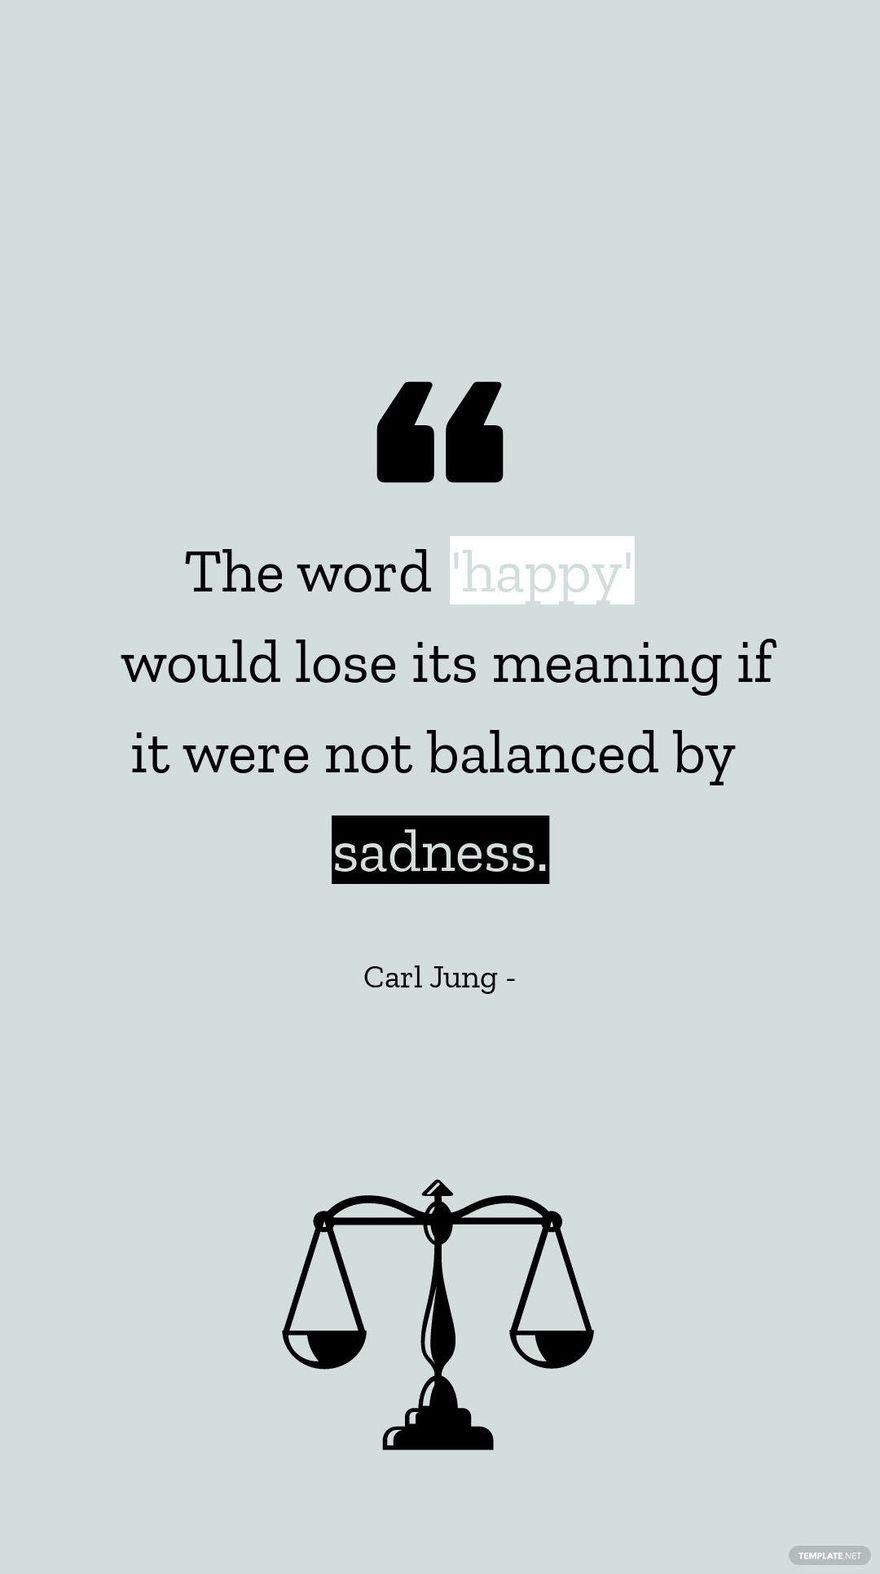 Carl Jung - The word 'happy' would lose its meaning if it were not balanced by sadness.